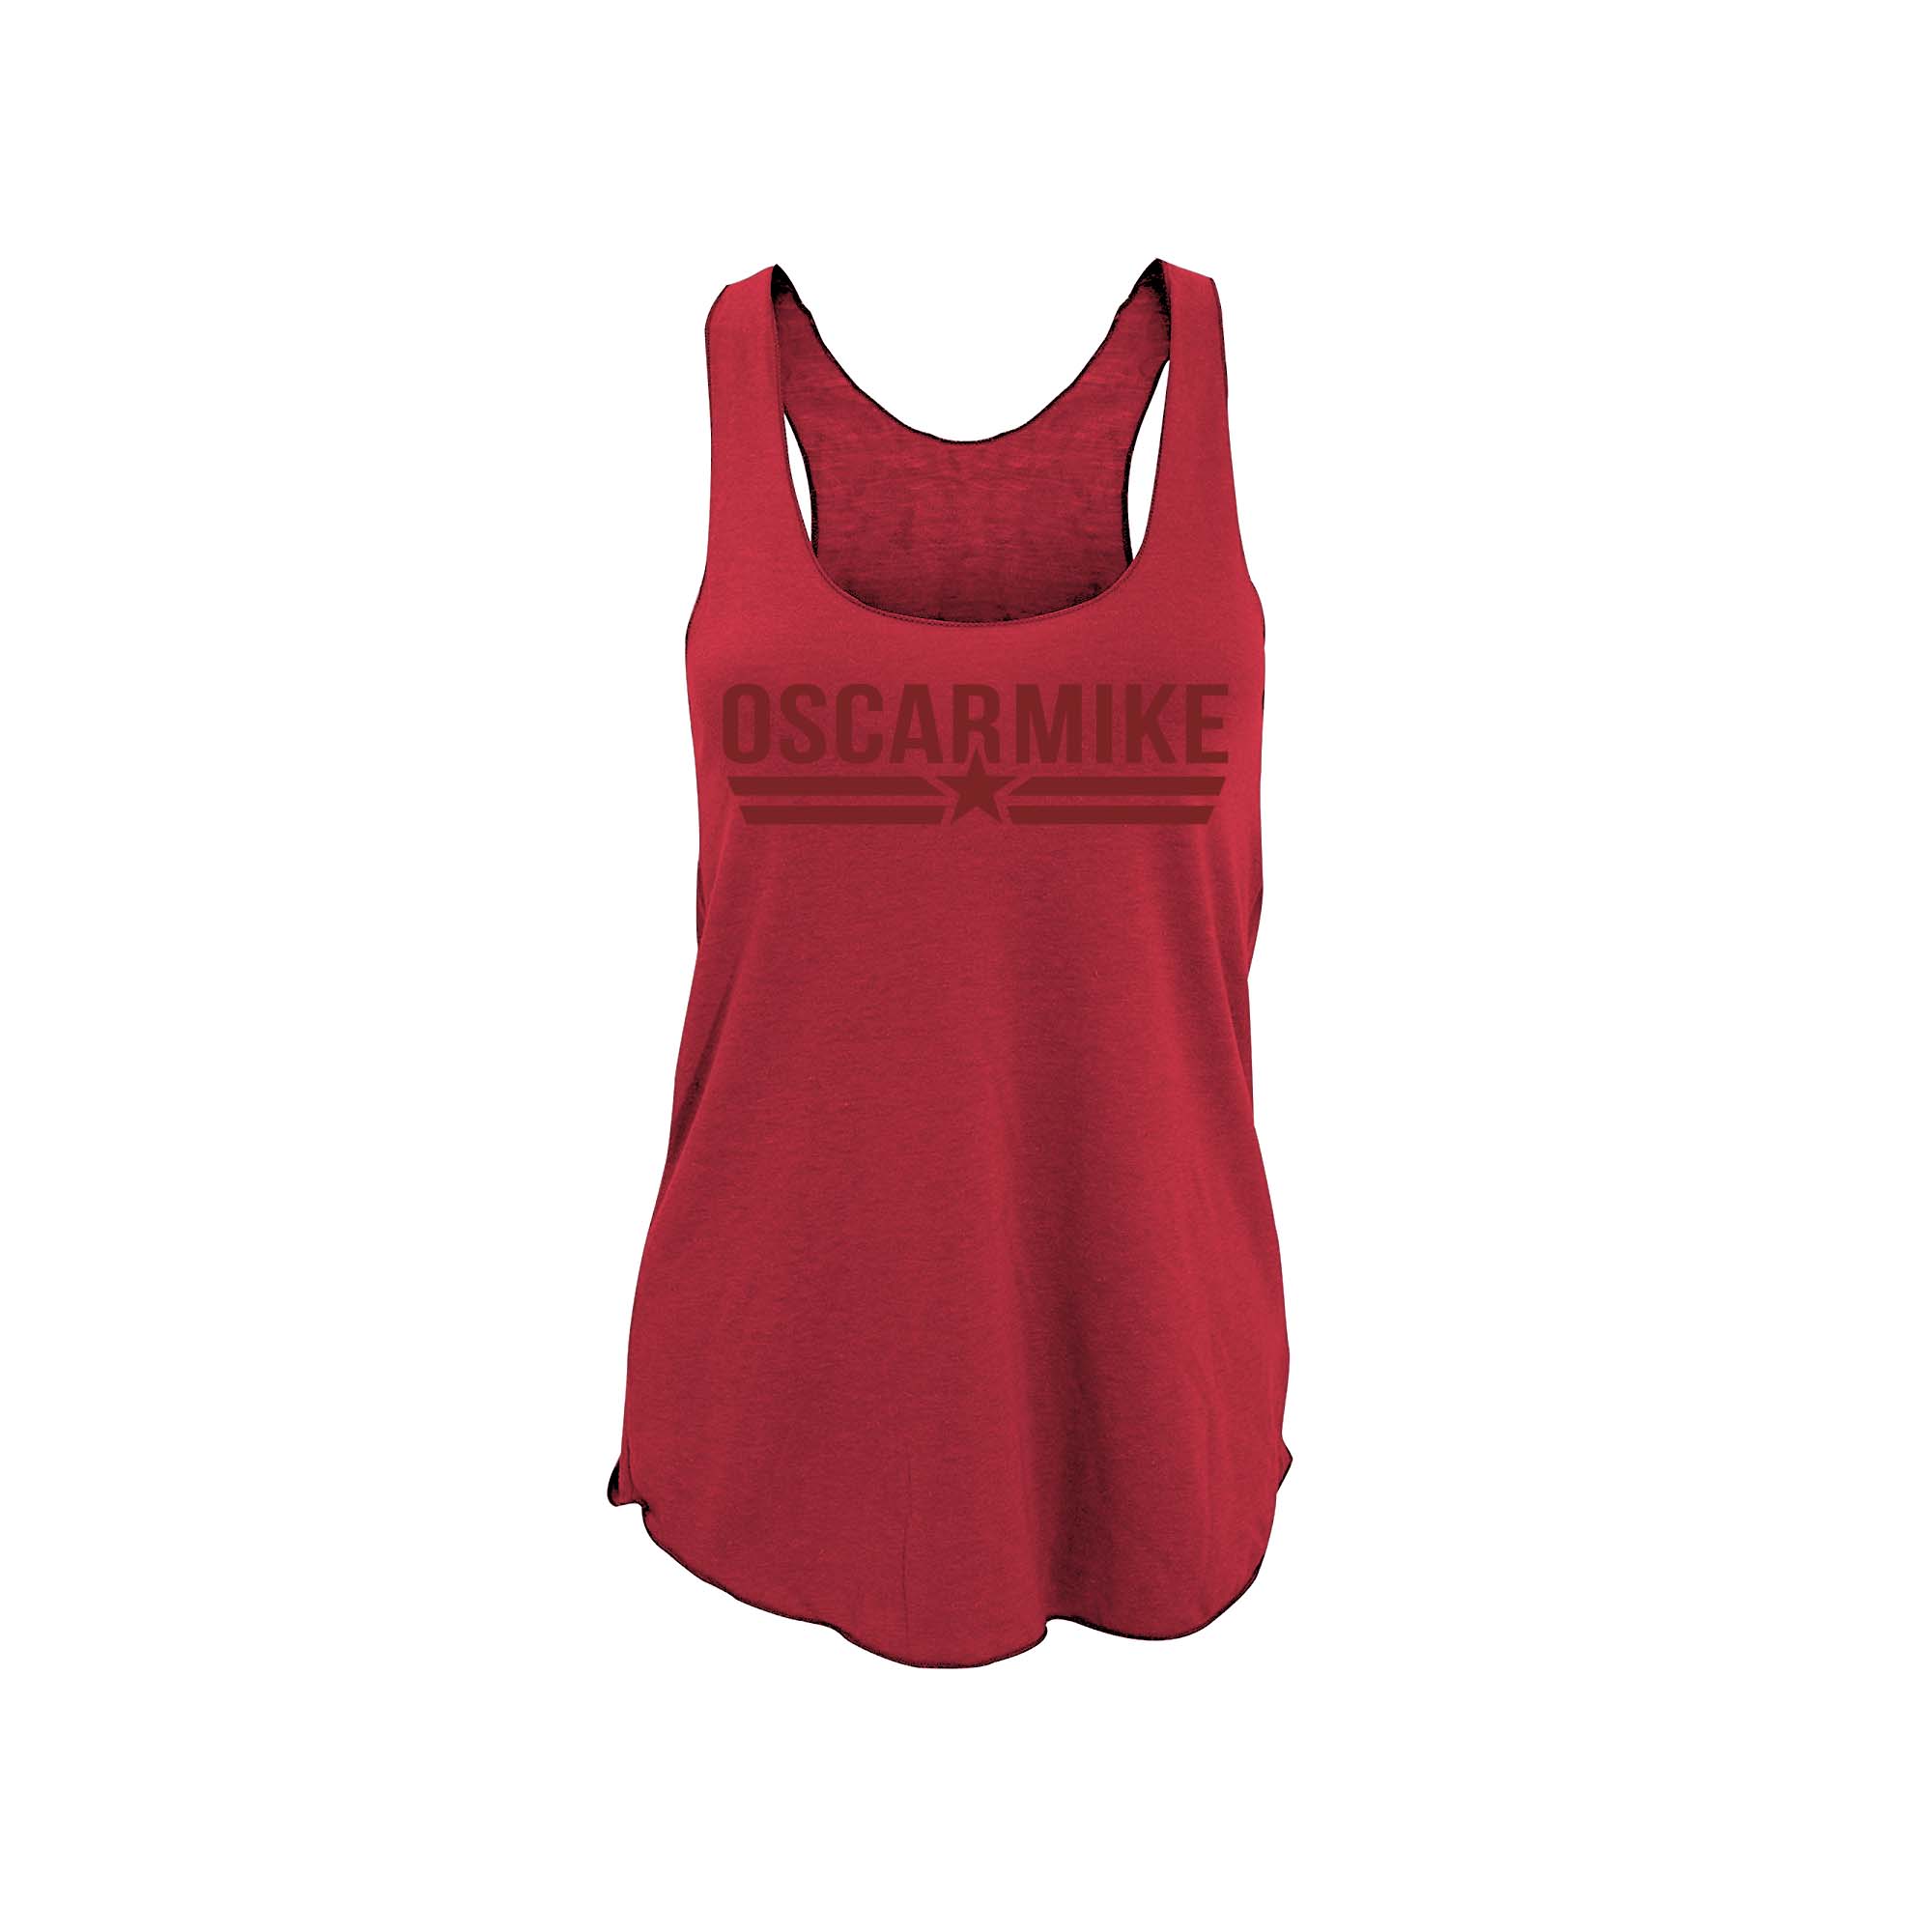 The 'Red On Red' Friday Tank